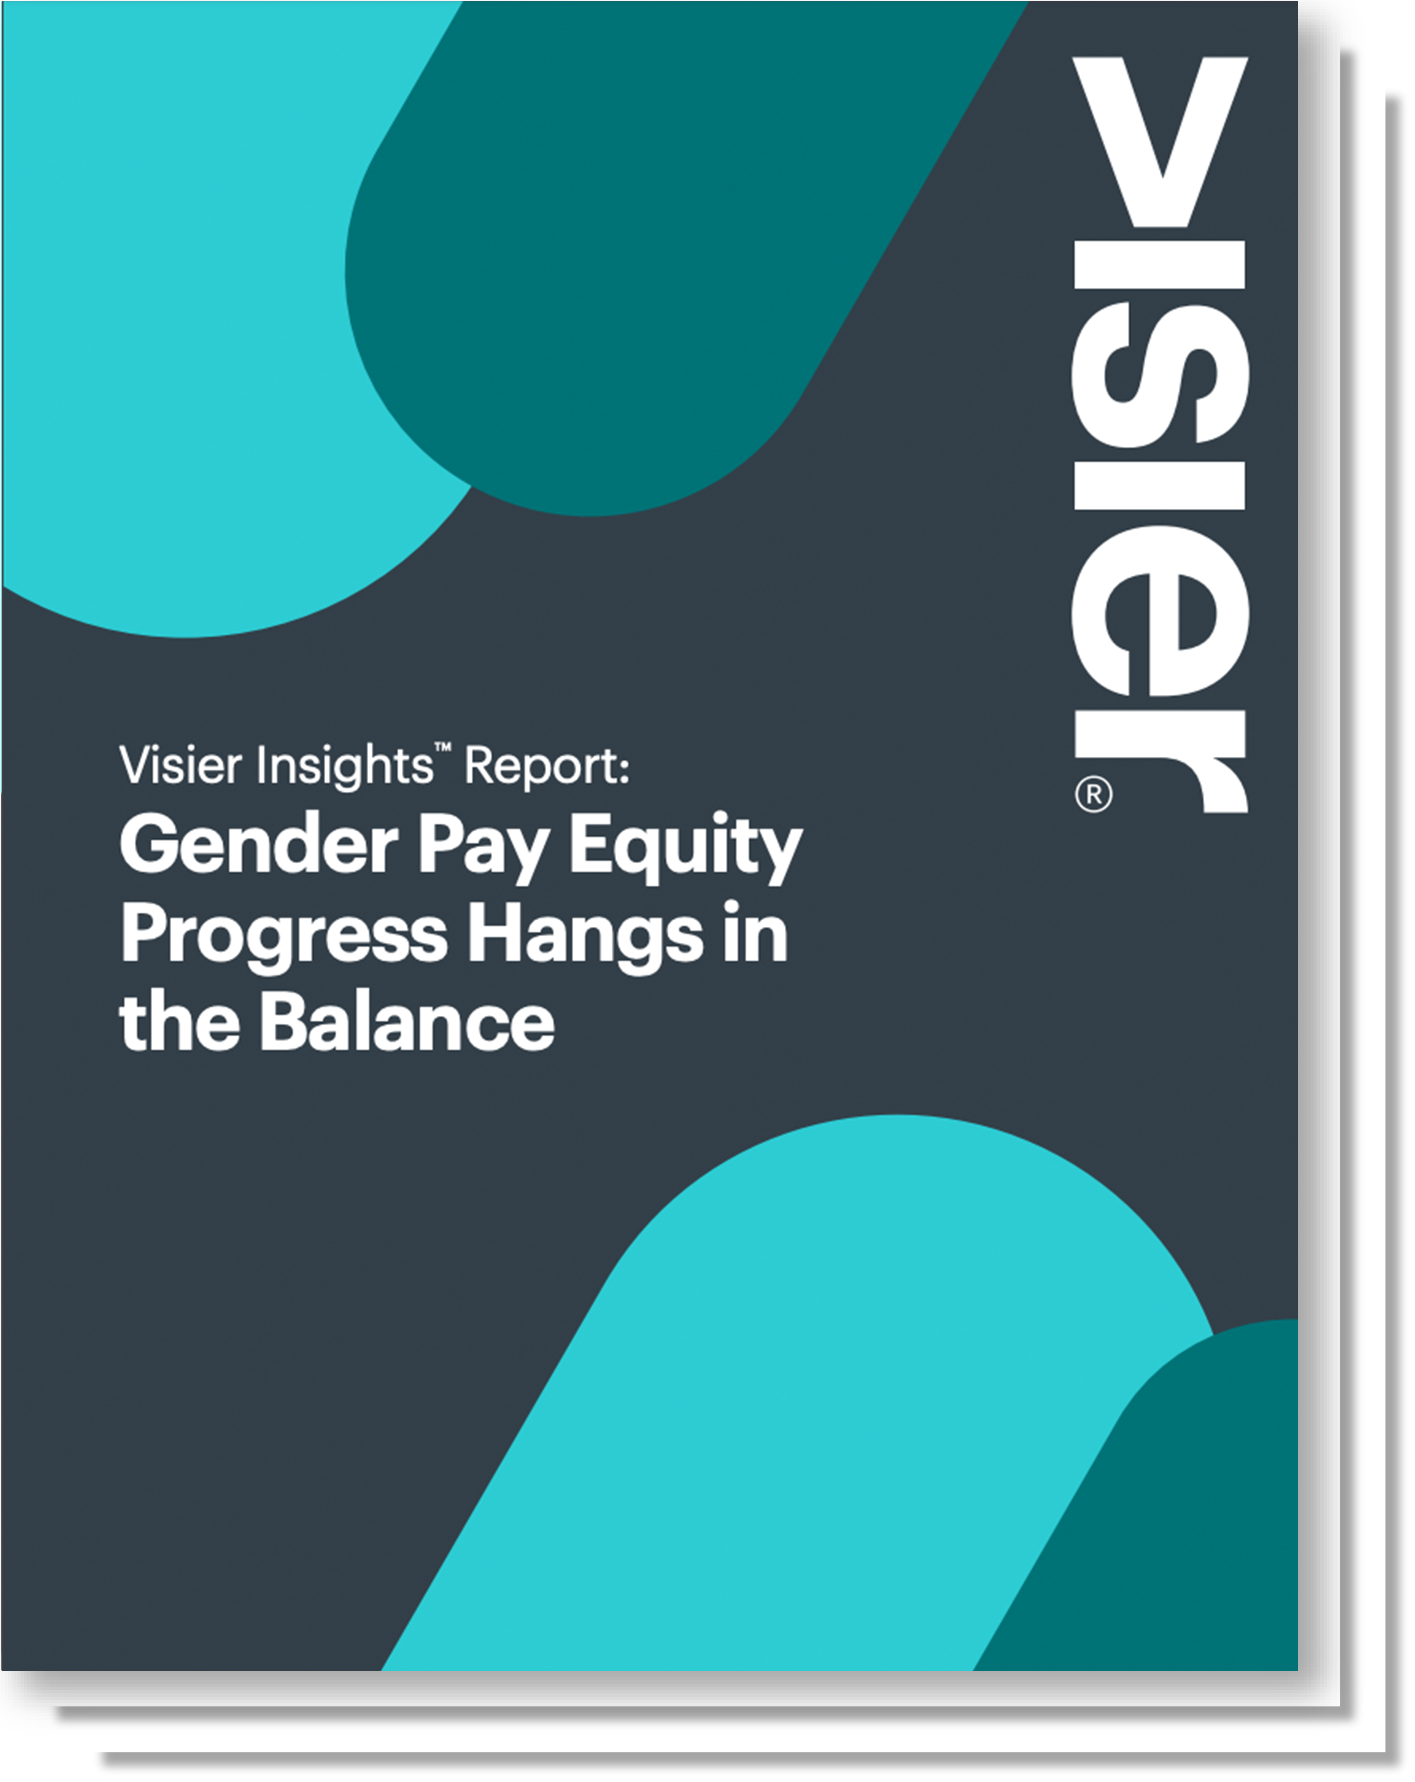 Gender Pay Equity Progress Hangs in the Balance